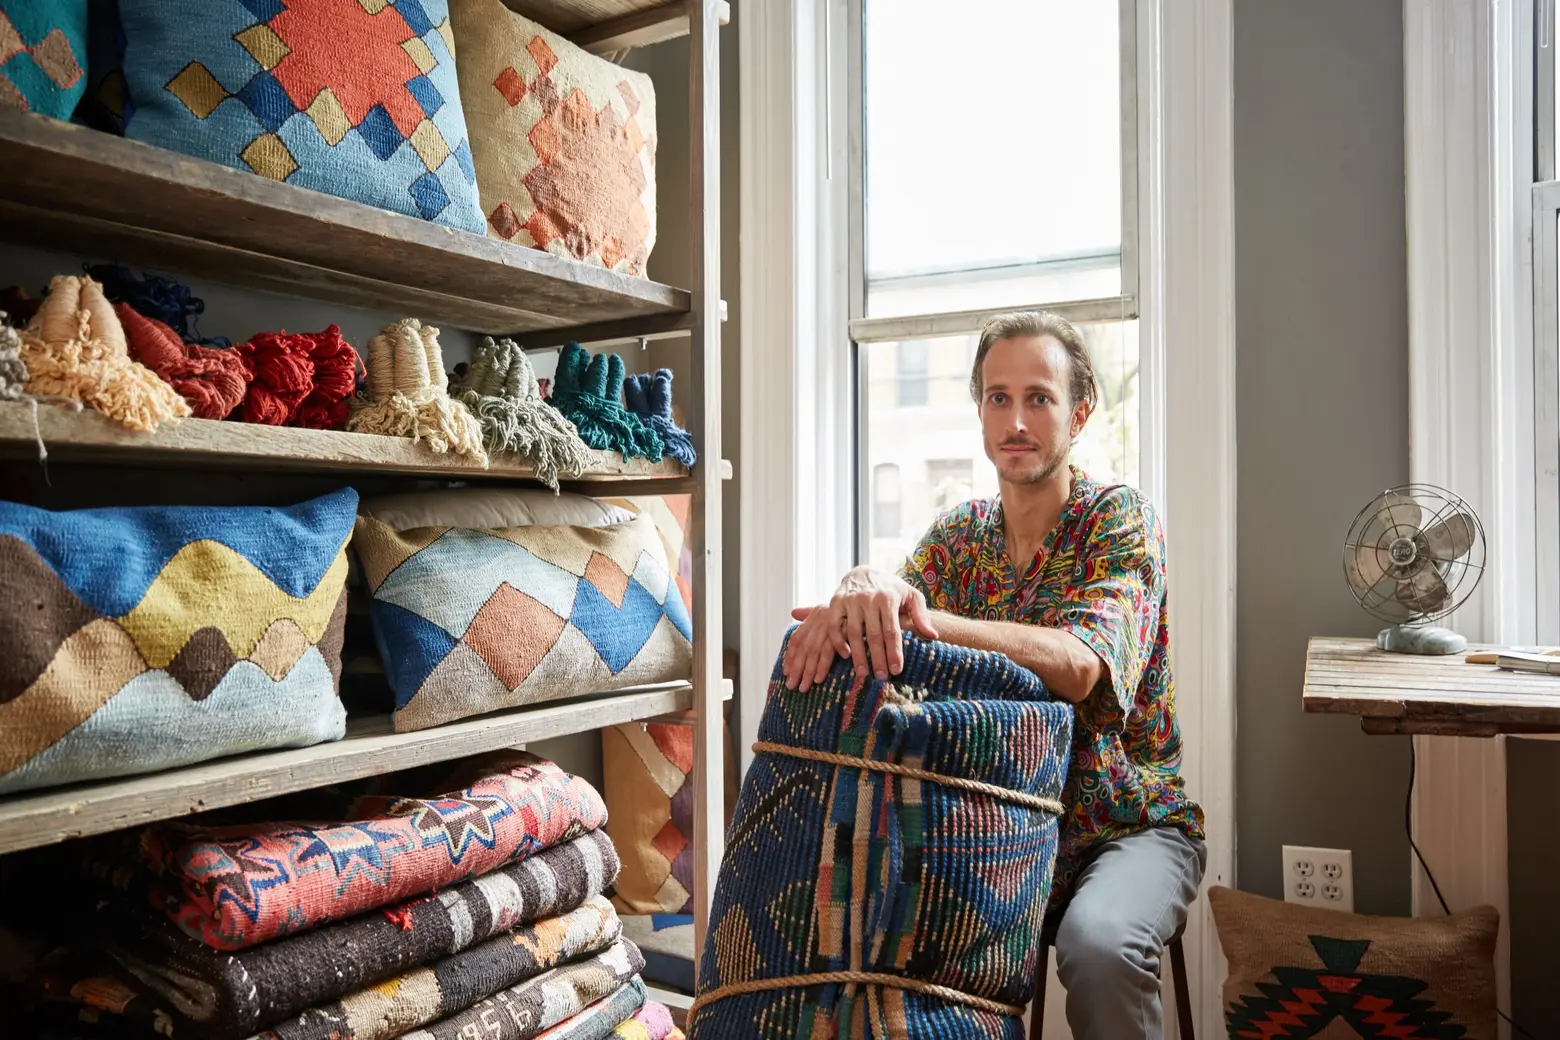 My 550sqft: A textile designer fits a studio and warehouse into his railroad Ridgewood home